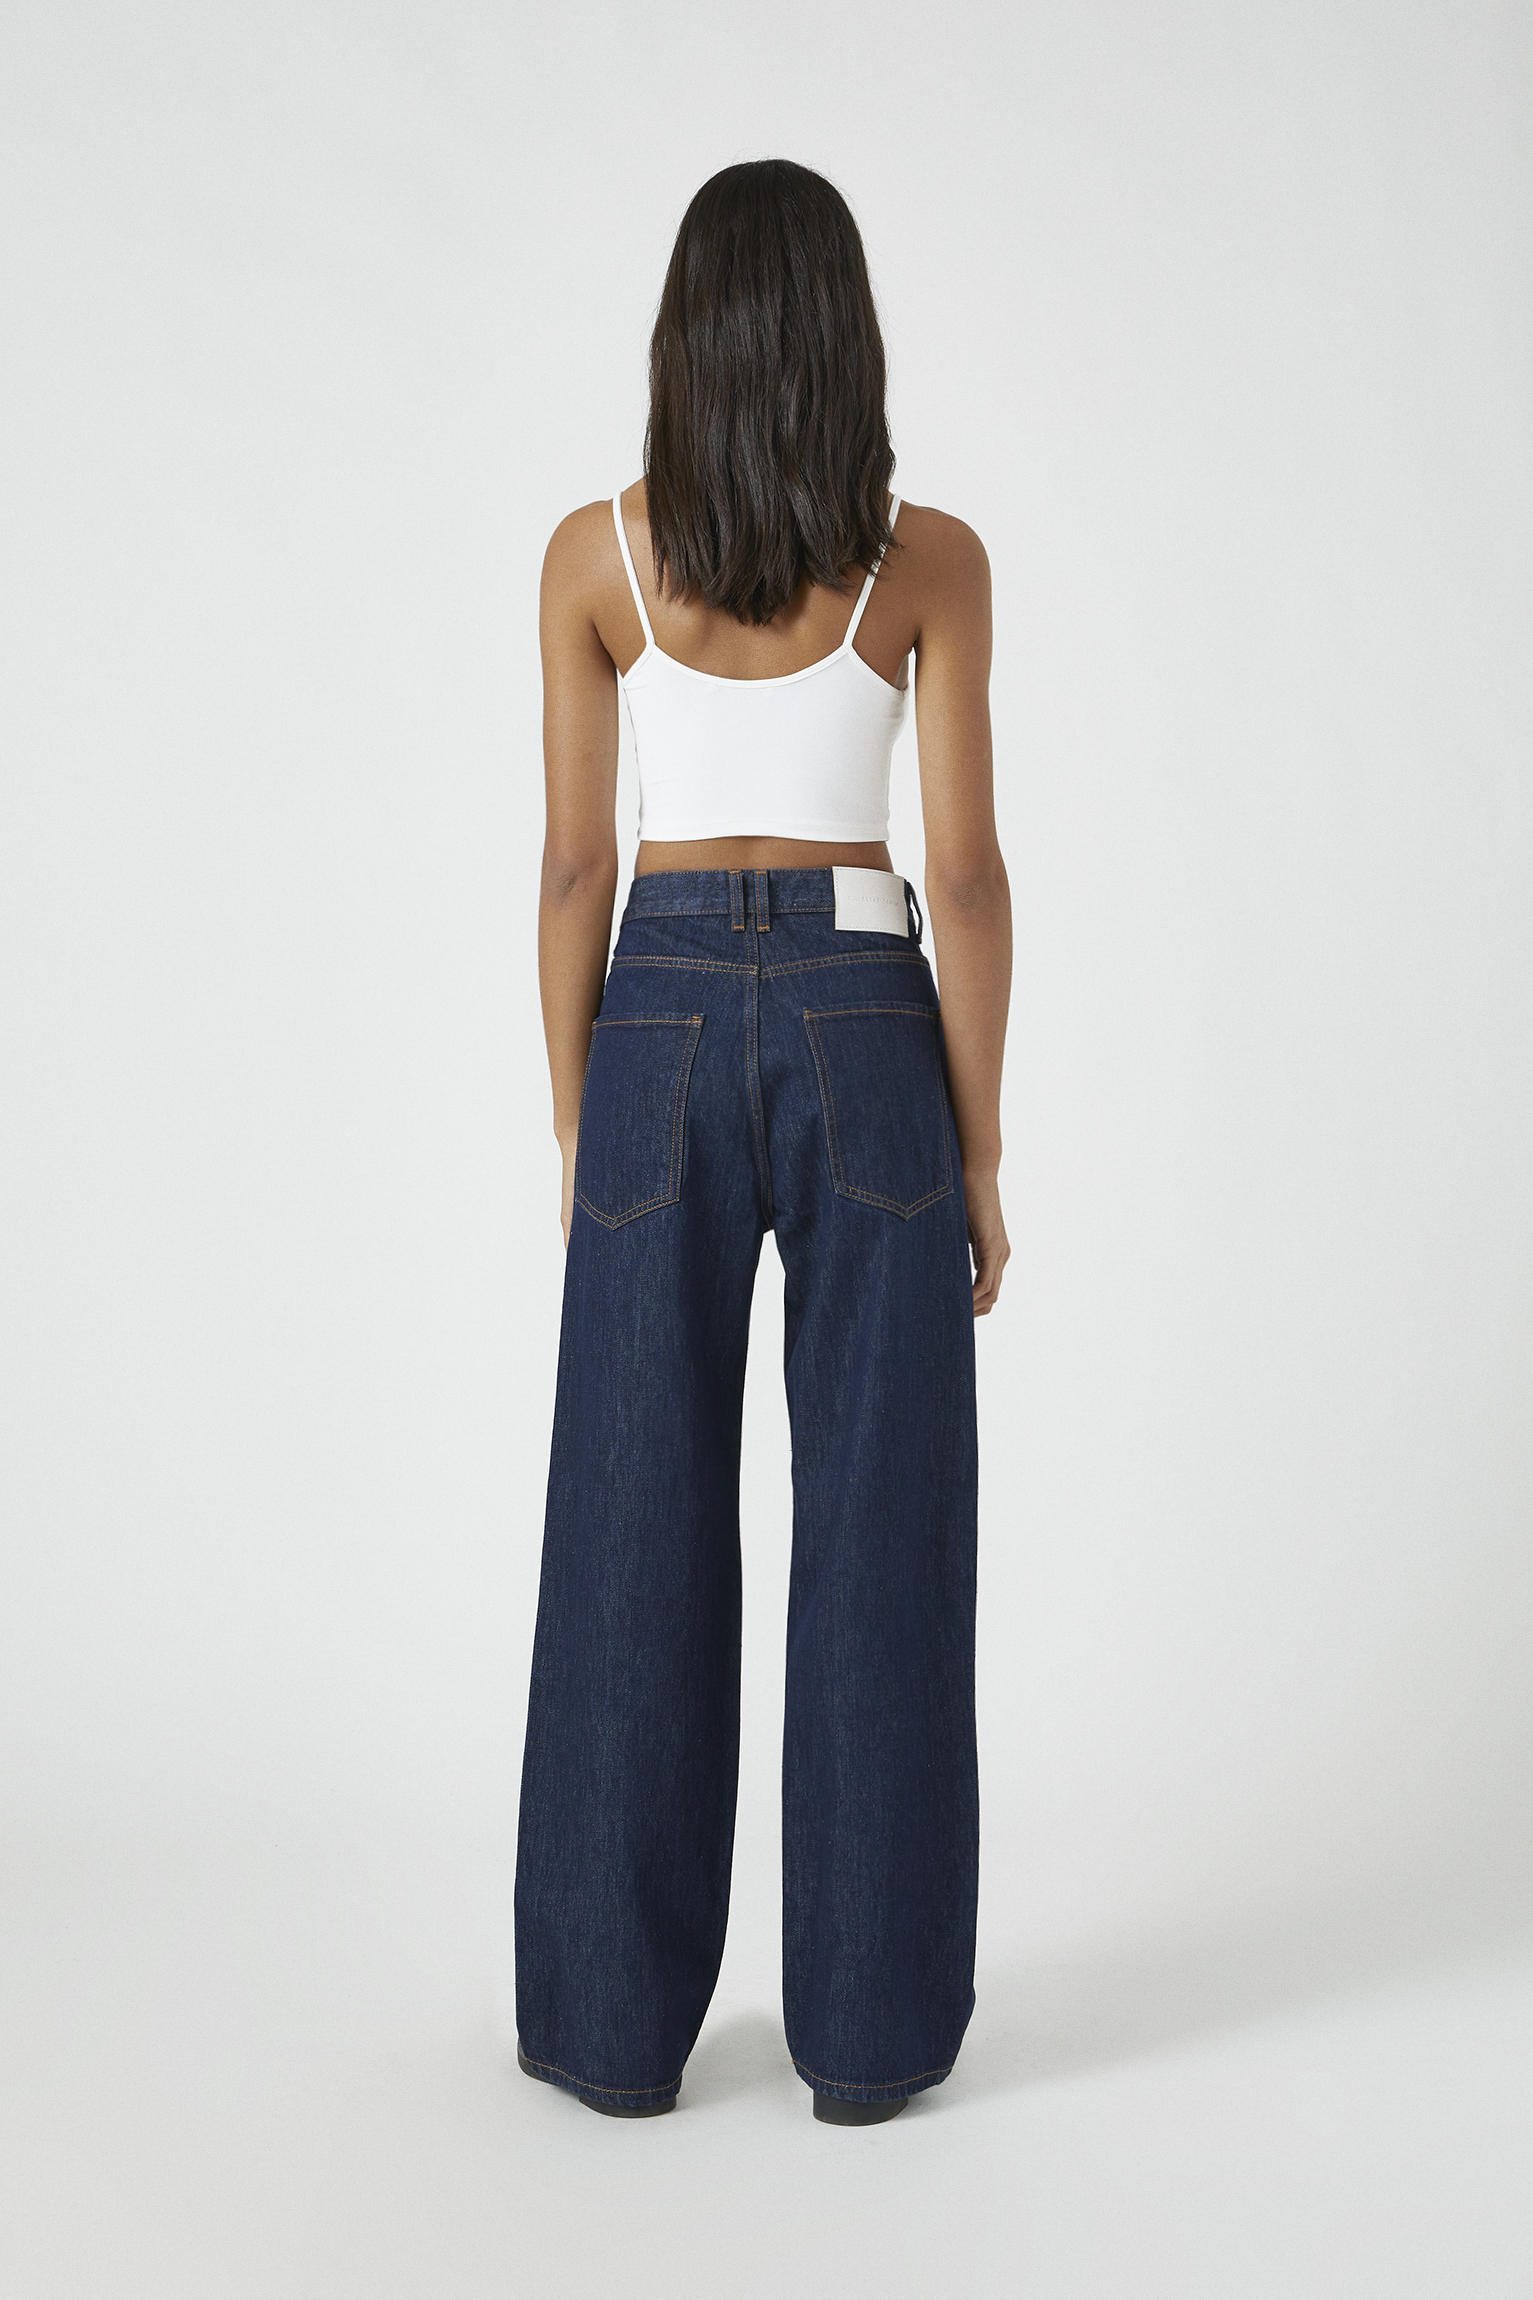 pull and bear baggy jeans